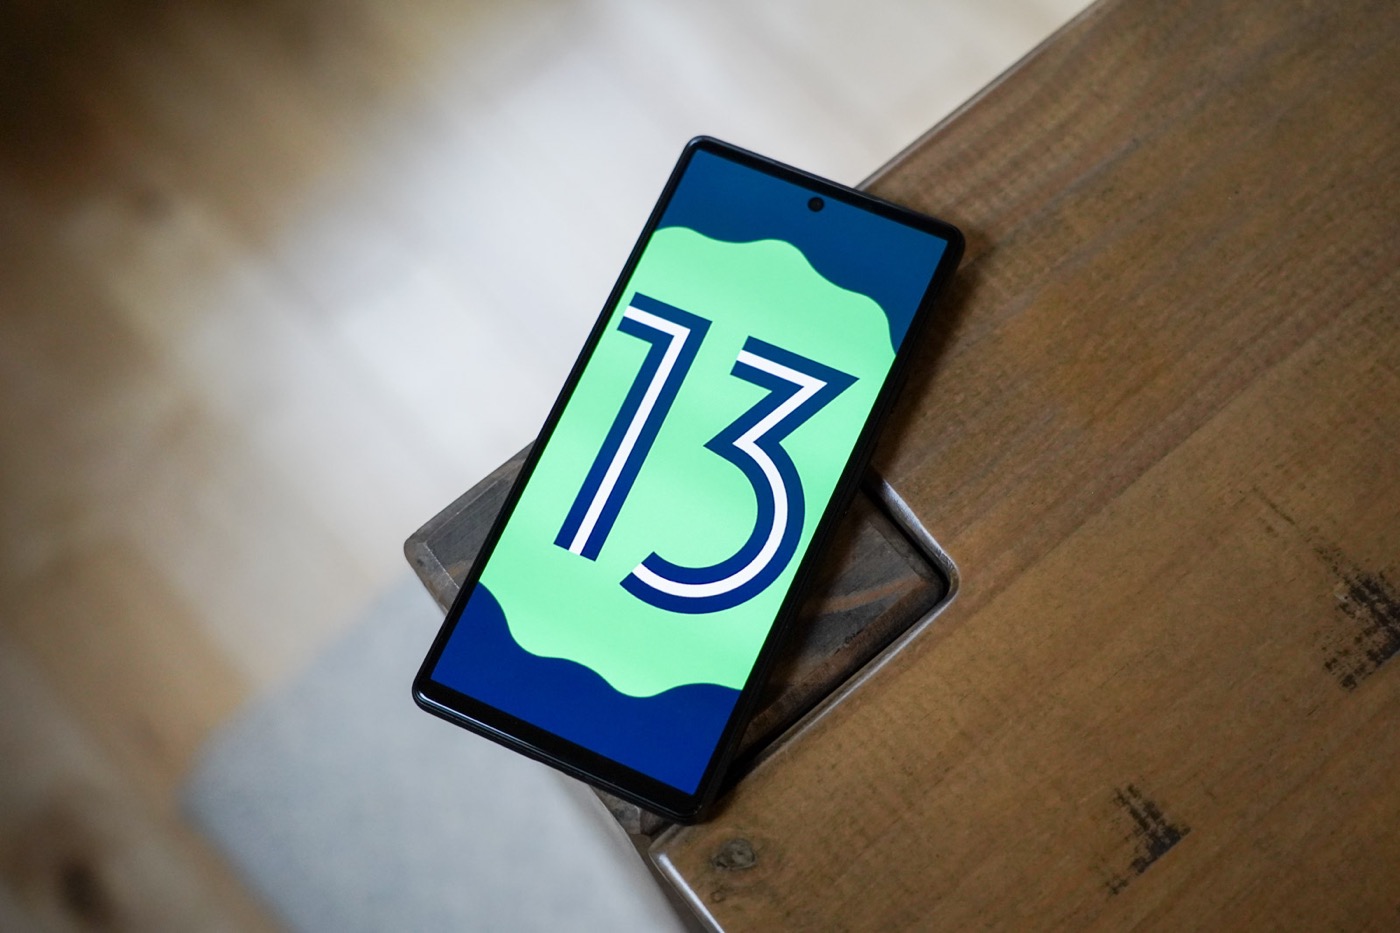 Android 13 is only installed on 5% of devices, several months after its release